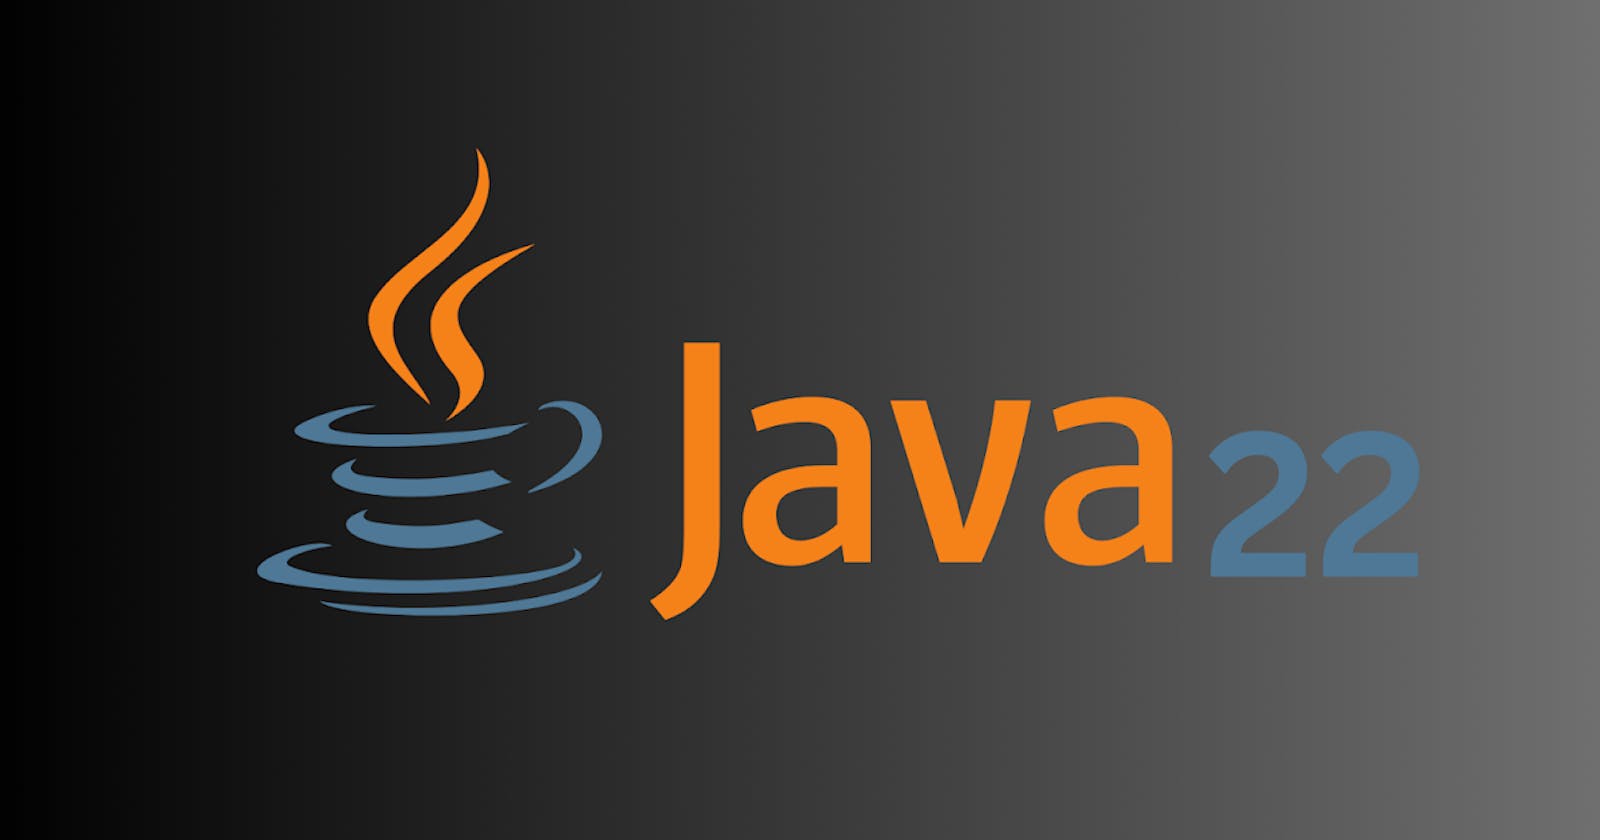 New Features in Java 22